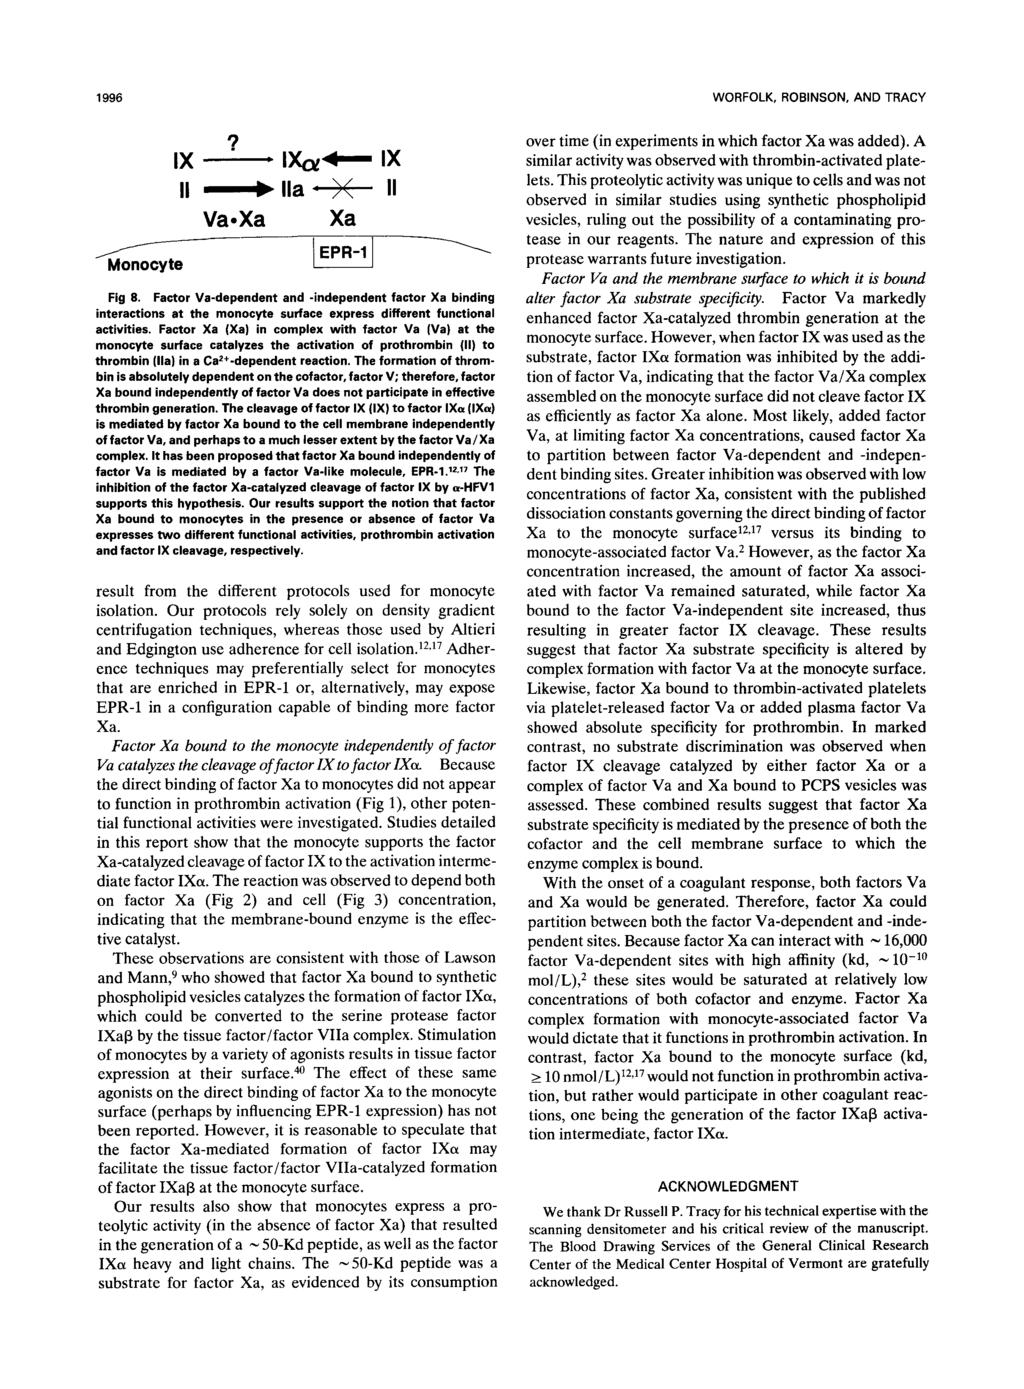 1996 WORFOLK, ROBINSON, AND TRACY VaaXa Xa Fig 8. Factor Va-dependent and -independent factor Xa binding interactions at the monocyte surface express different functional activities.